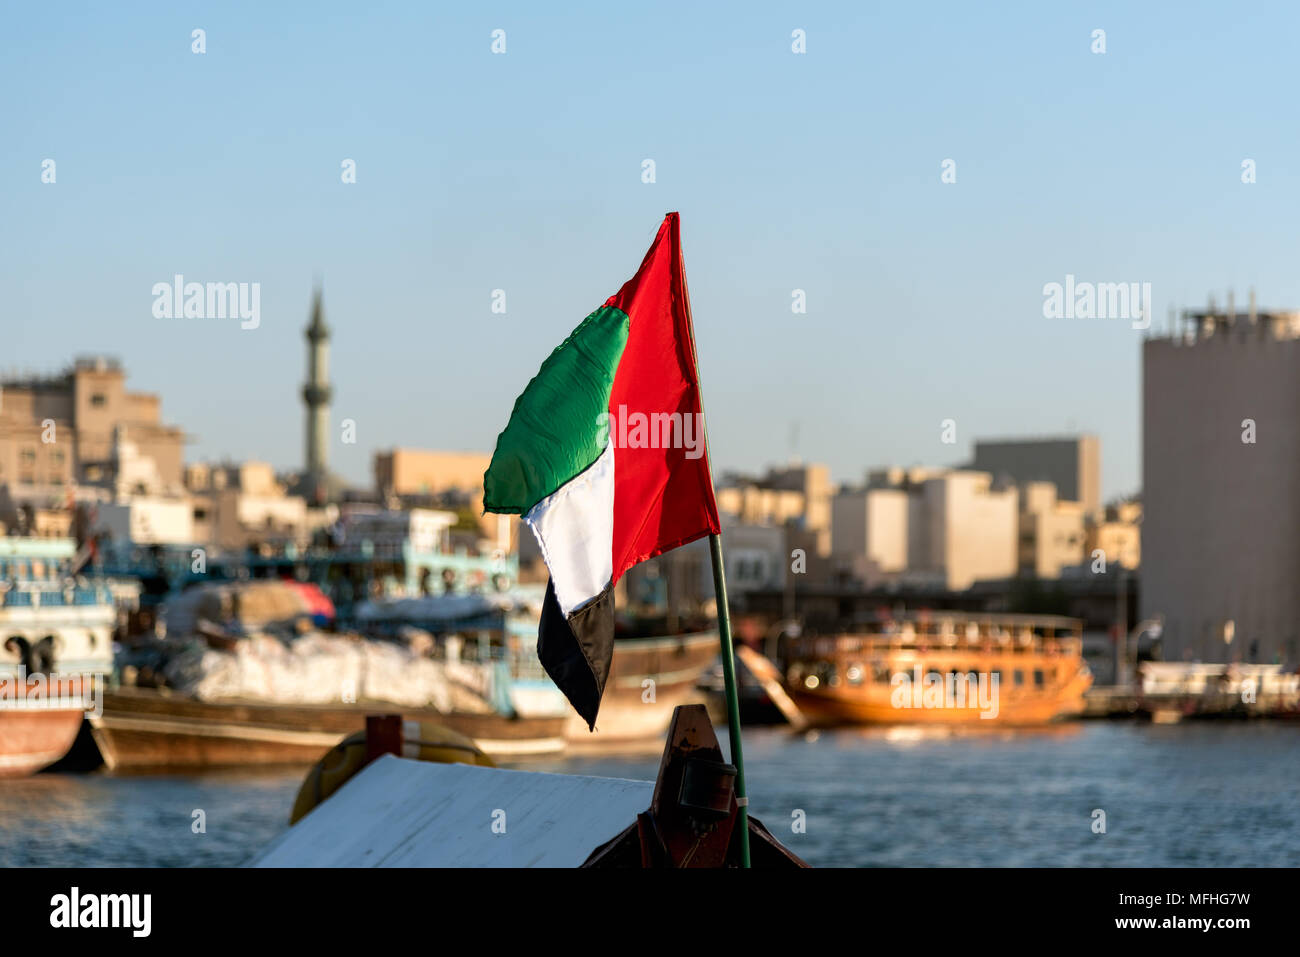 Dubai Creek with traditional boats and piers. Stock Photo